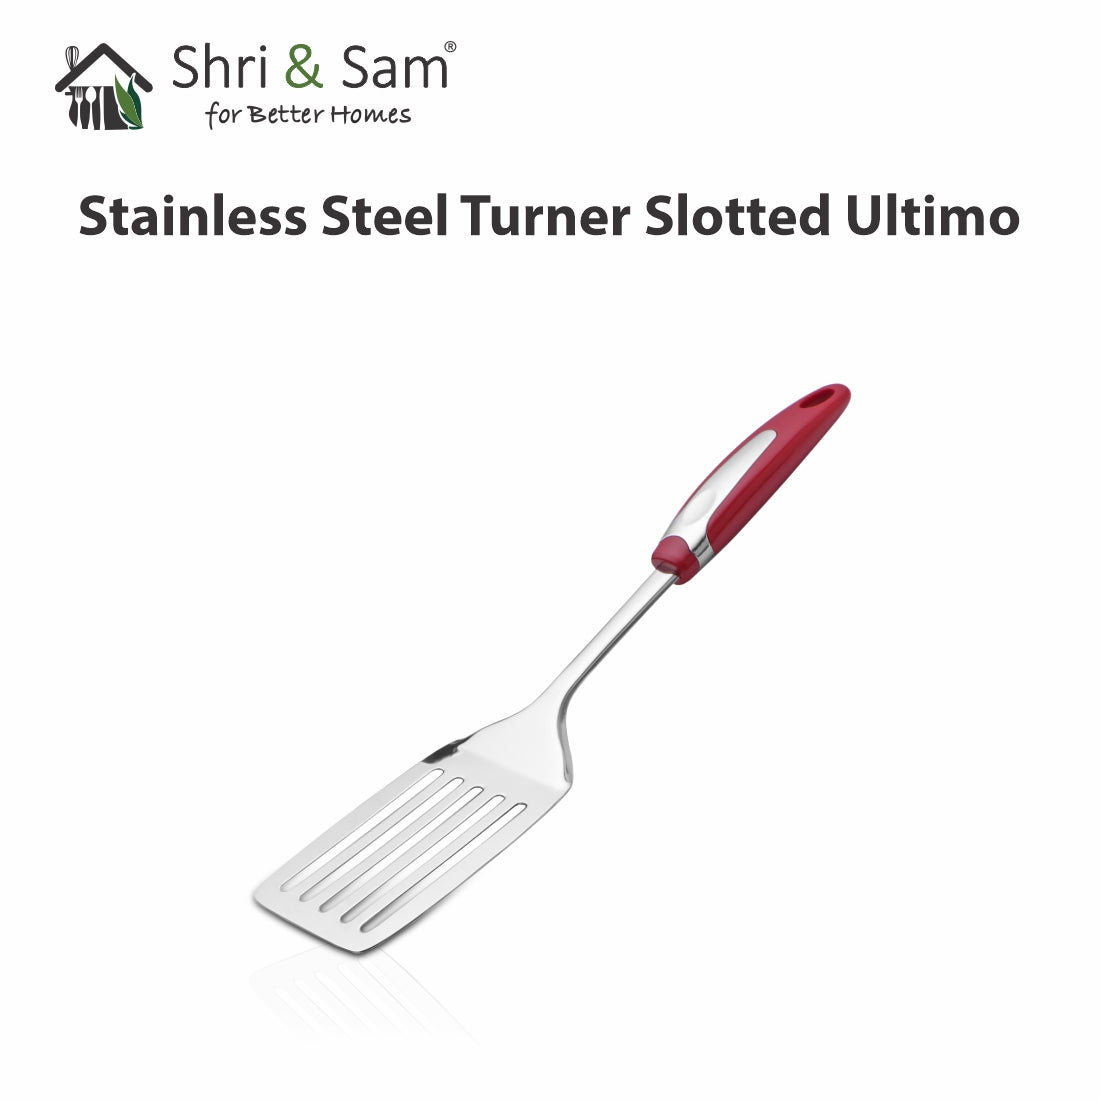 Stainless Steel Turner Slotted Ultimo